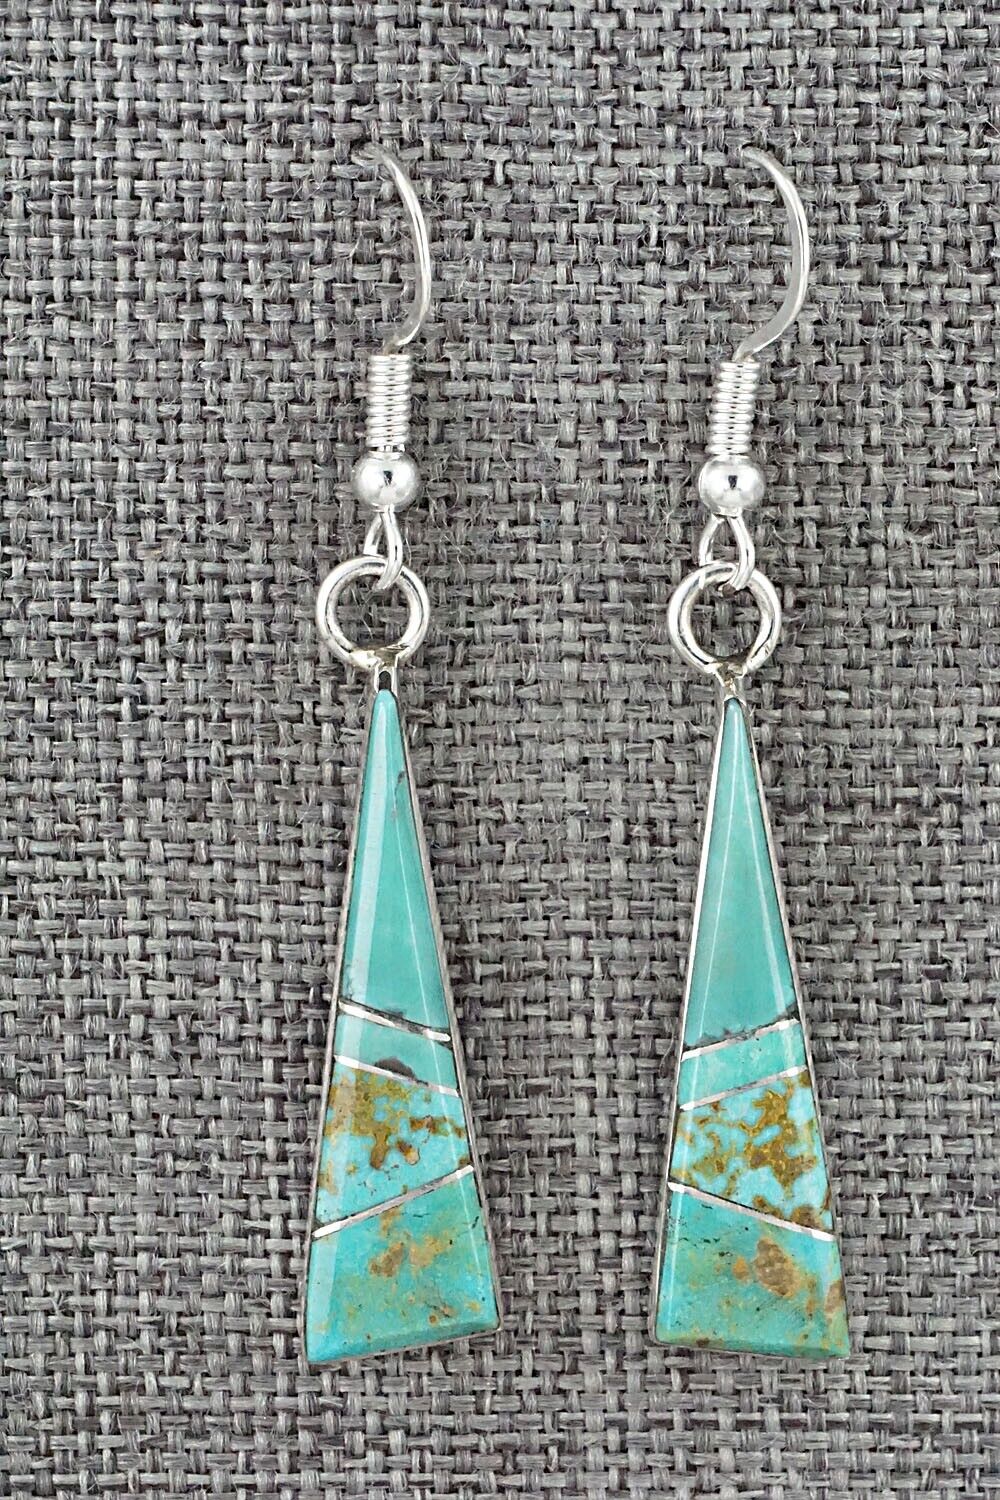 Turquoise & Sterling Silver Inlay Earrings - Marilyn Yazzie